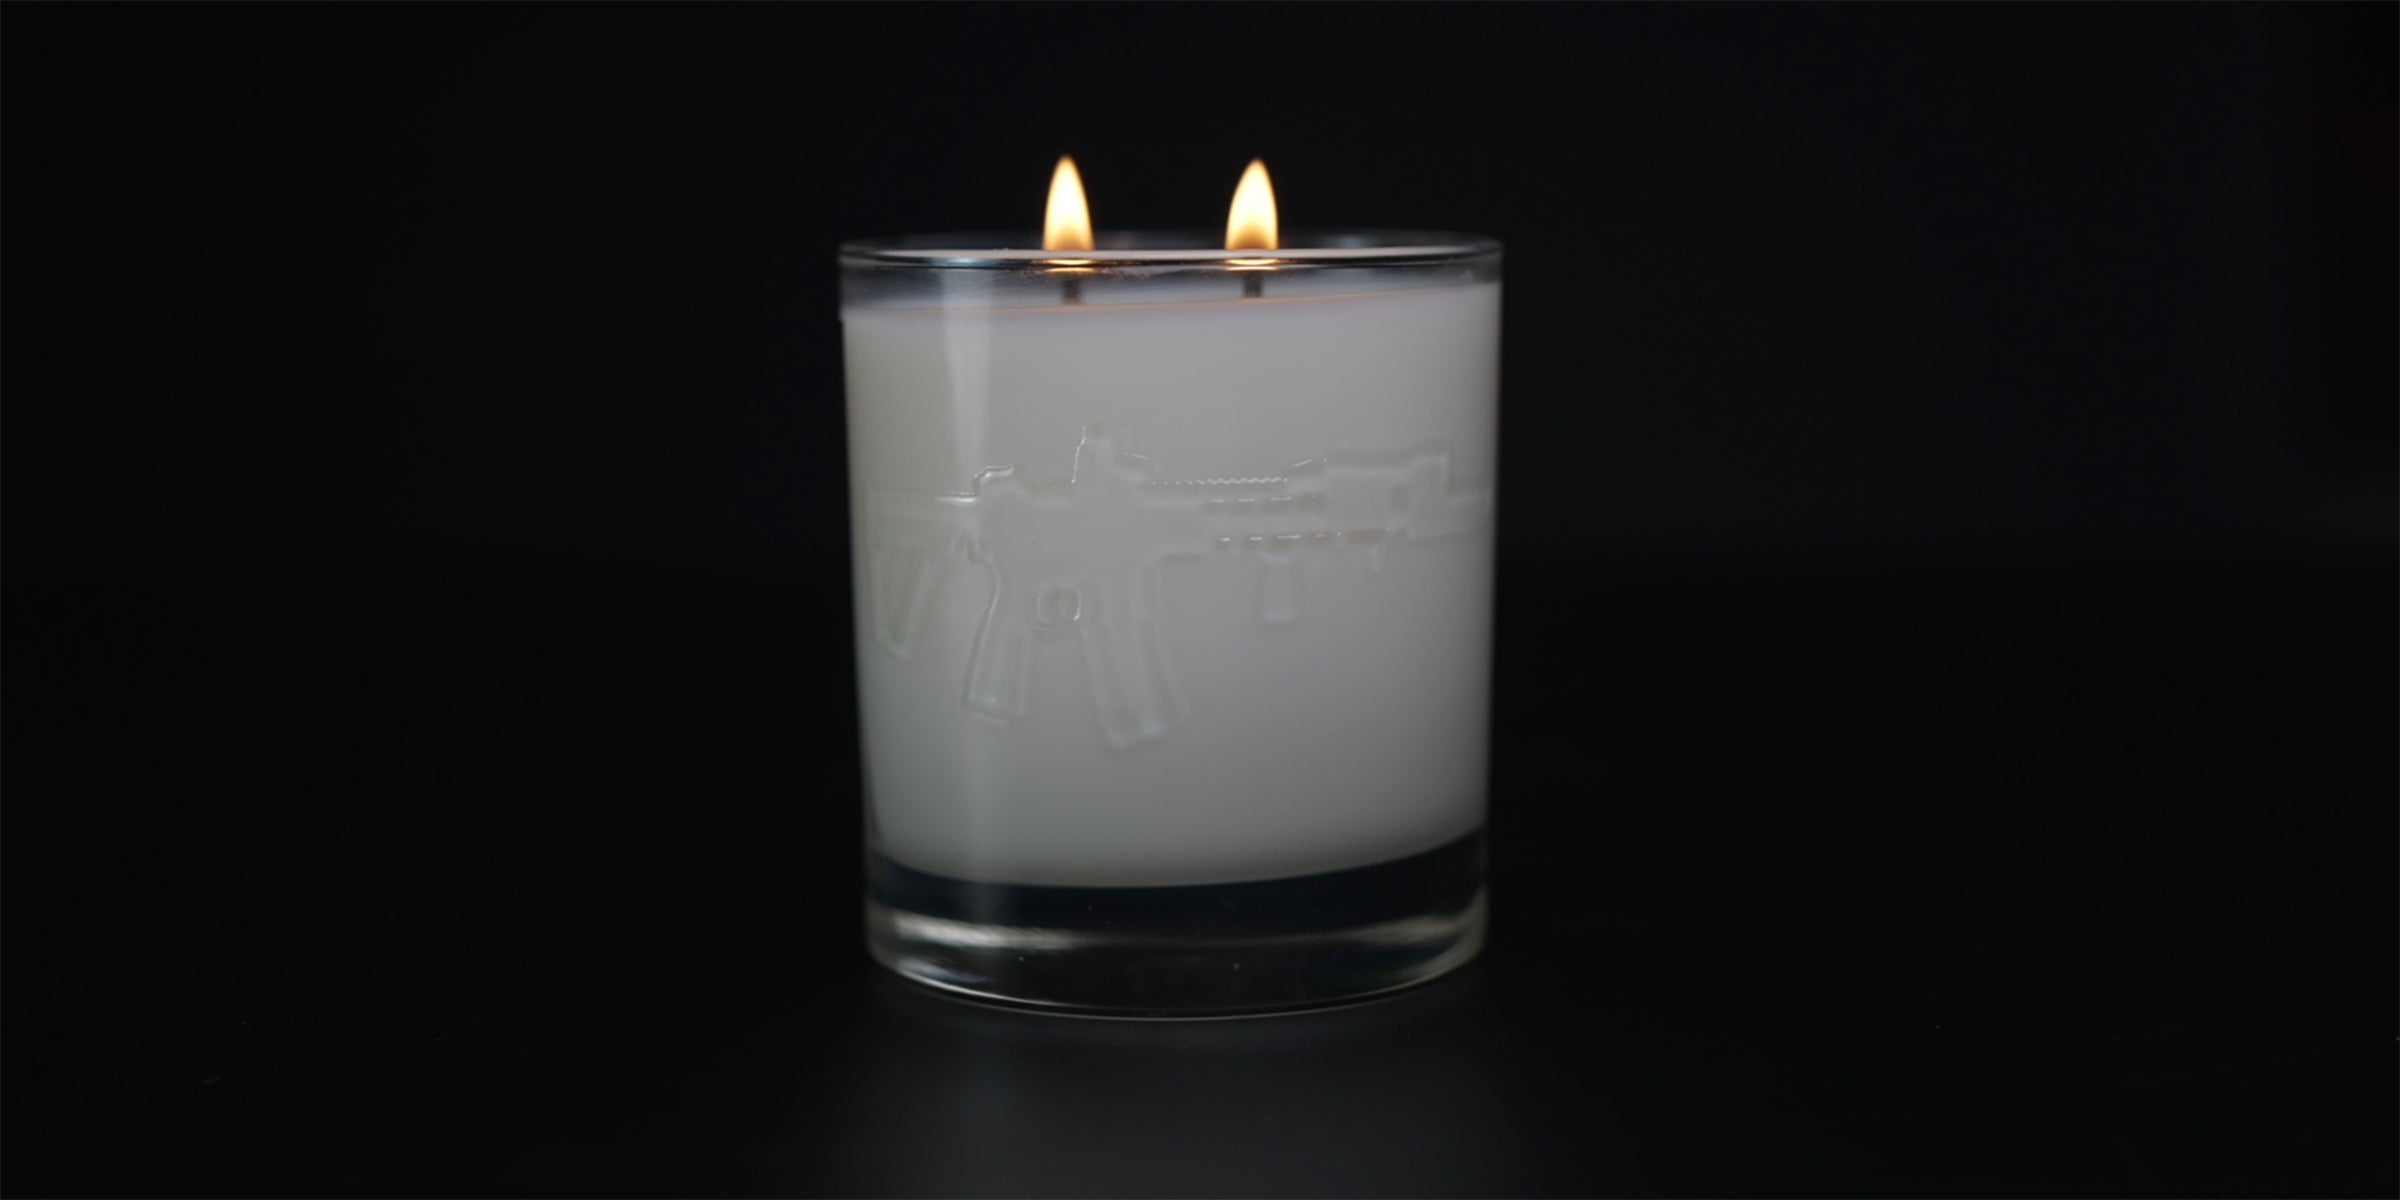 bourbon glass candle, embossed ar15 rifle, lit candle on black background